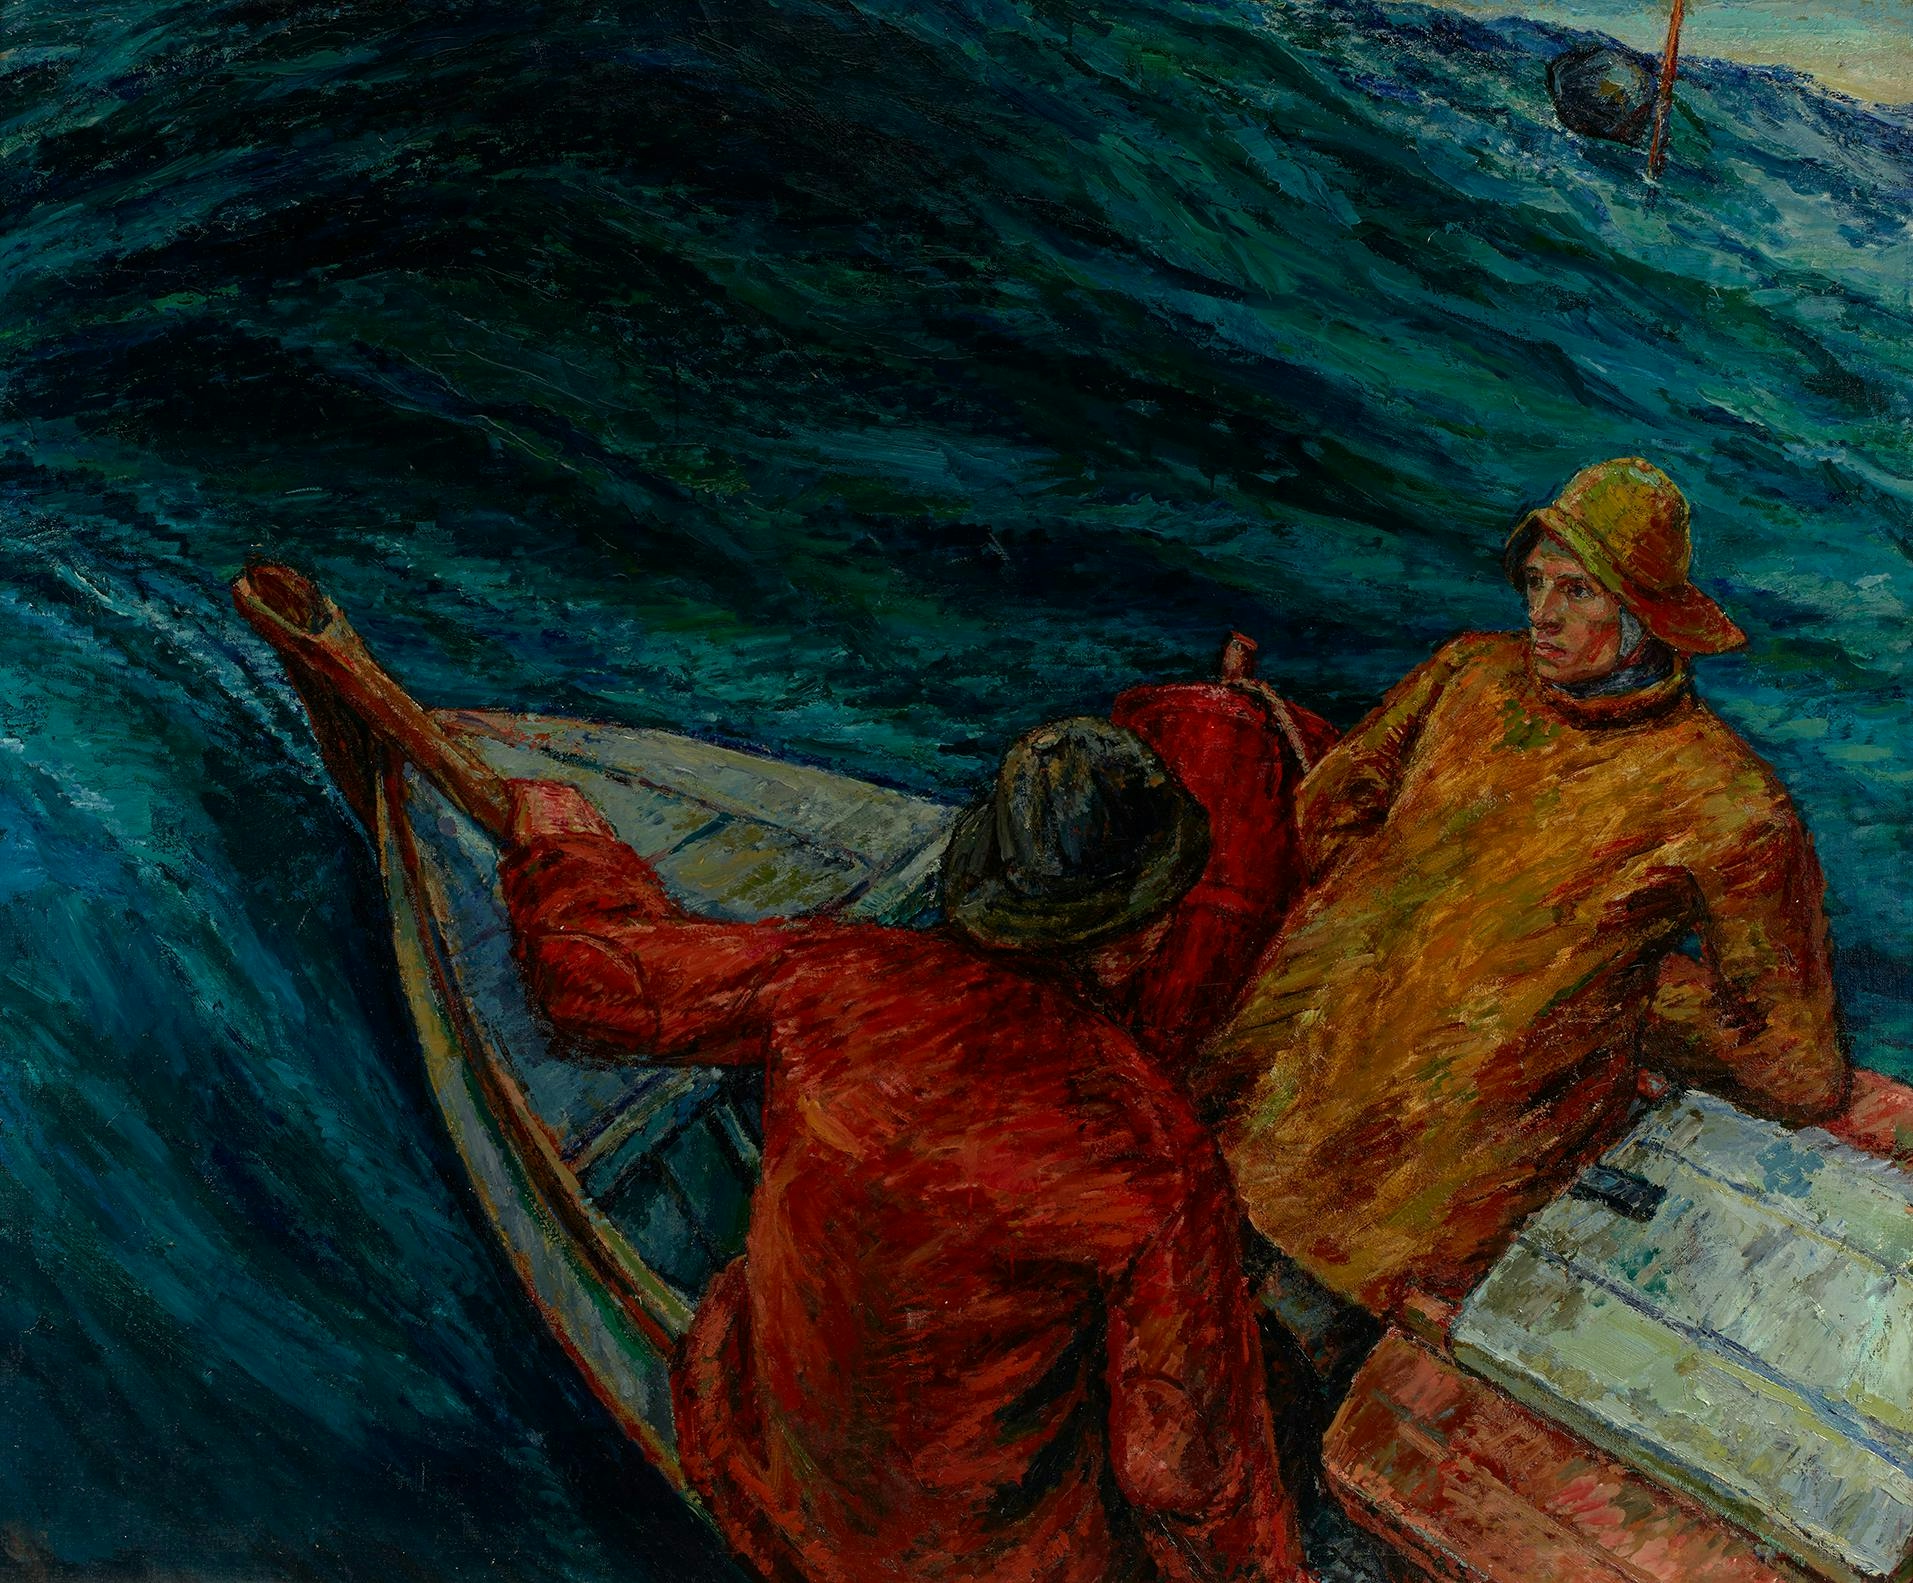 LÍ 902, Gunnlaugur Scheving, The Wave, two sailors on a small boat